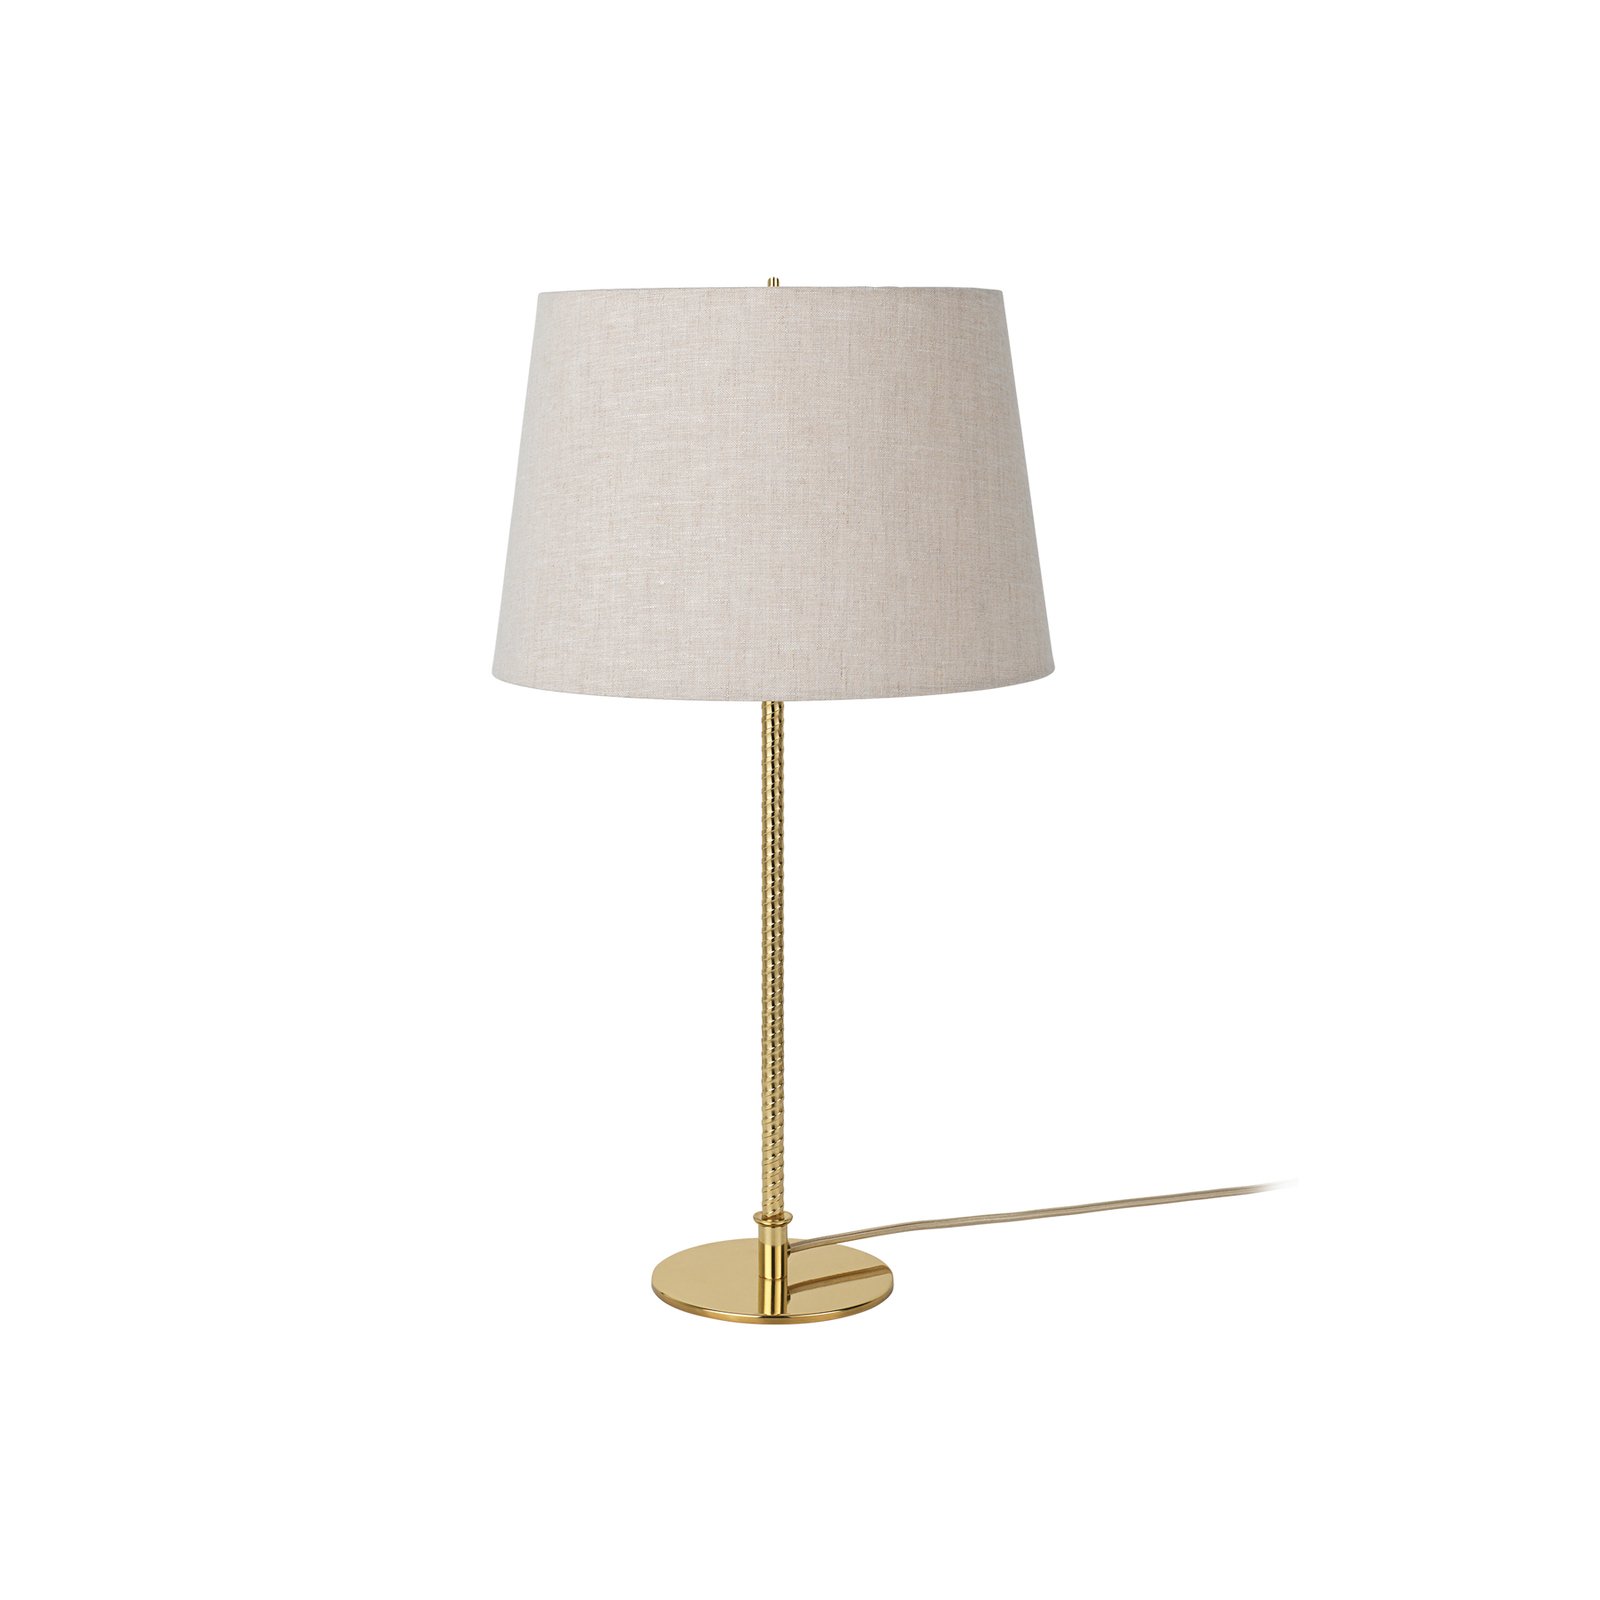 GUBI table lamp 9205, brass, Canvas lampshade, height 58 cm